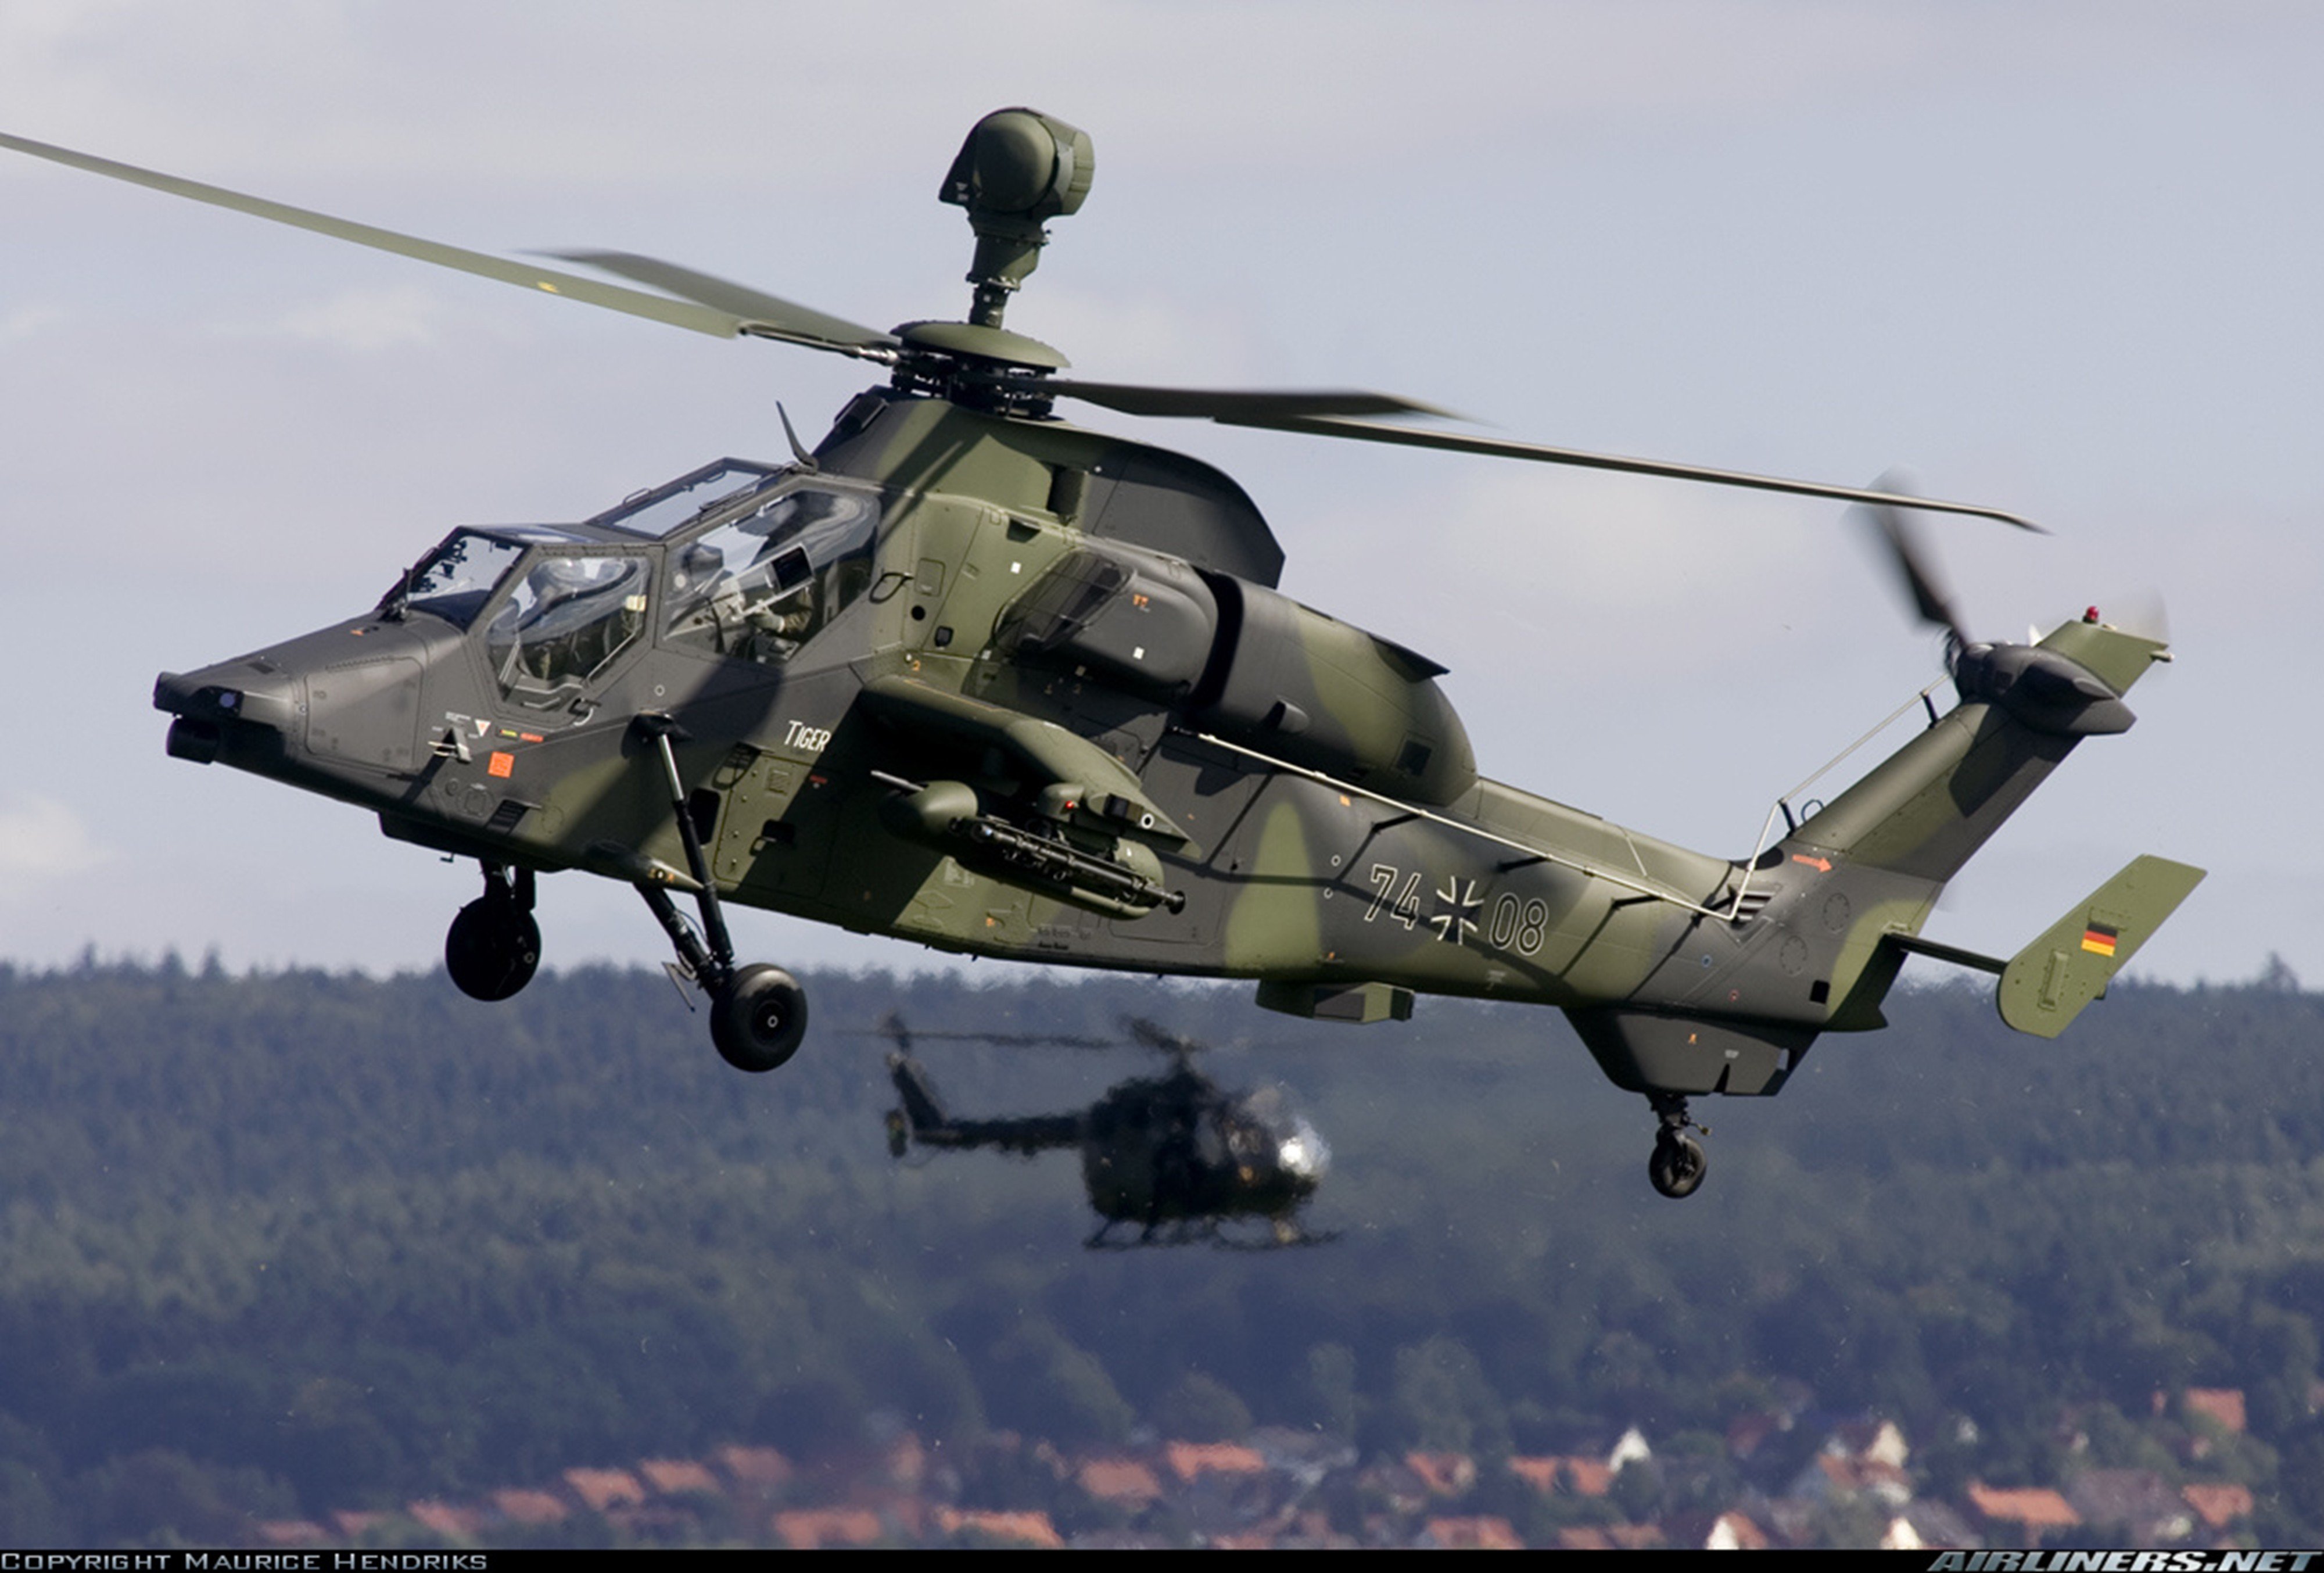 helicopter, Aircraft, Vehicle, Military, Army, Attack, Eurocopter, Tiger, Germany Wallpaper